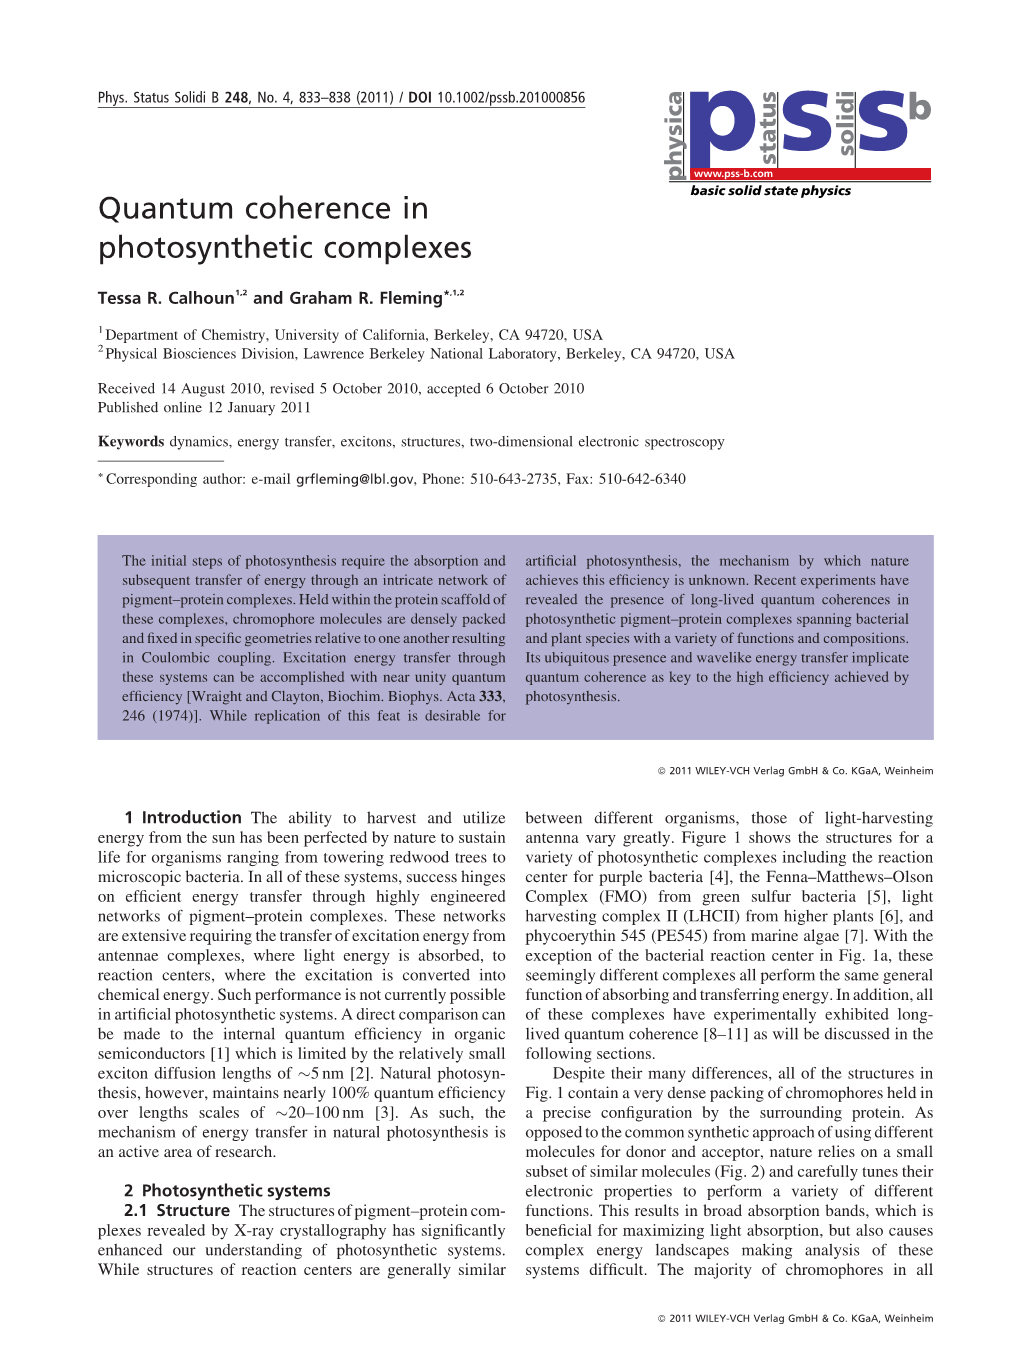 Quantum Coherence in Photosynthetic Complexes